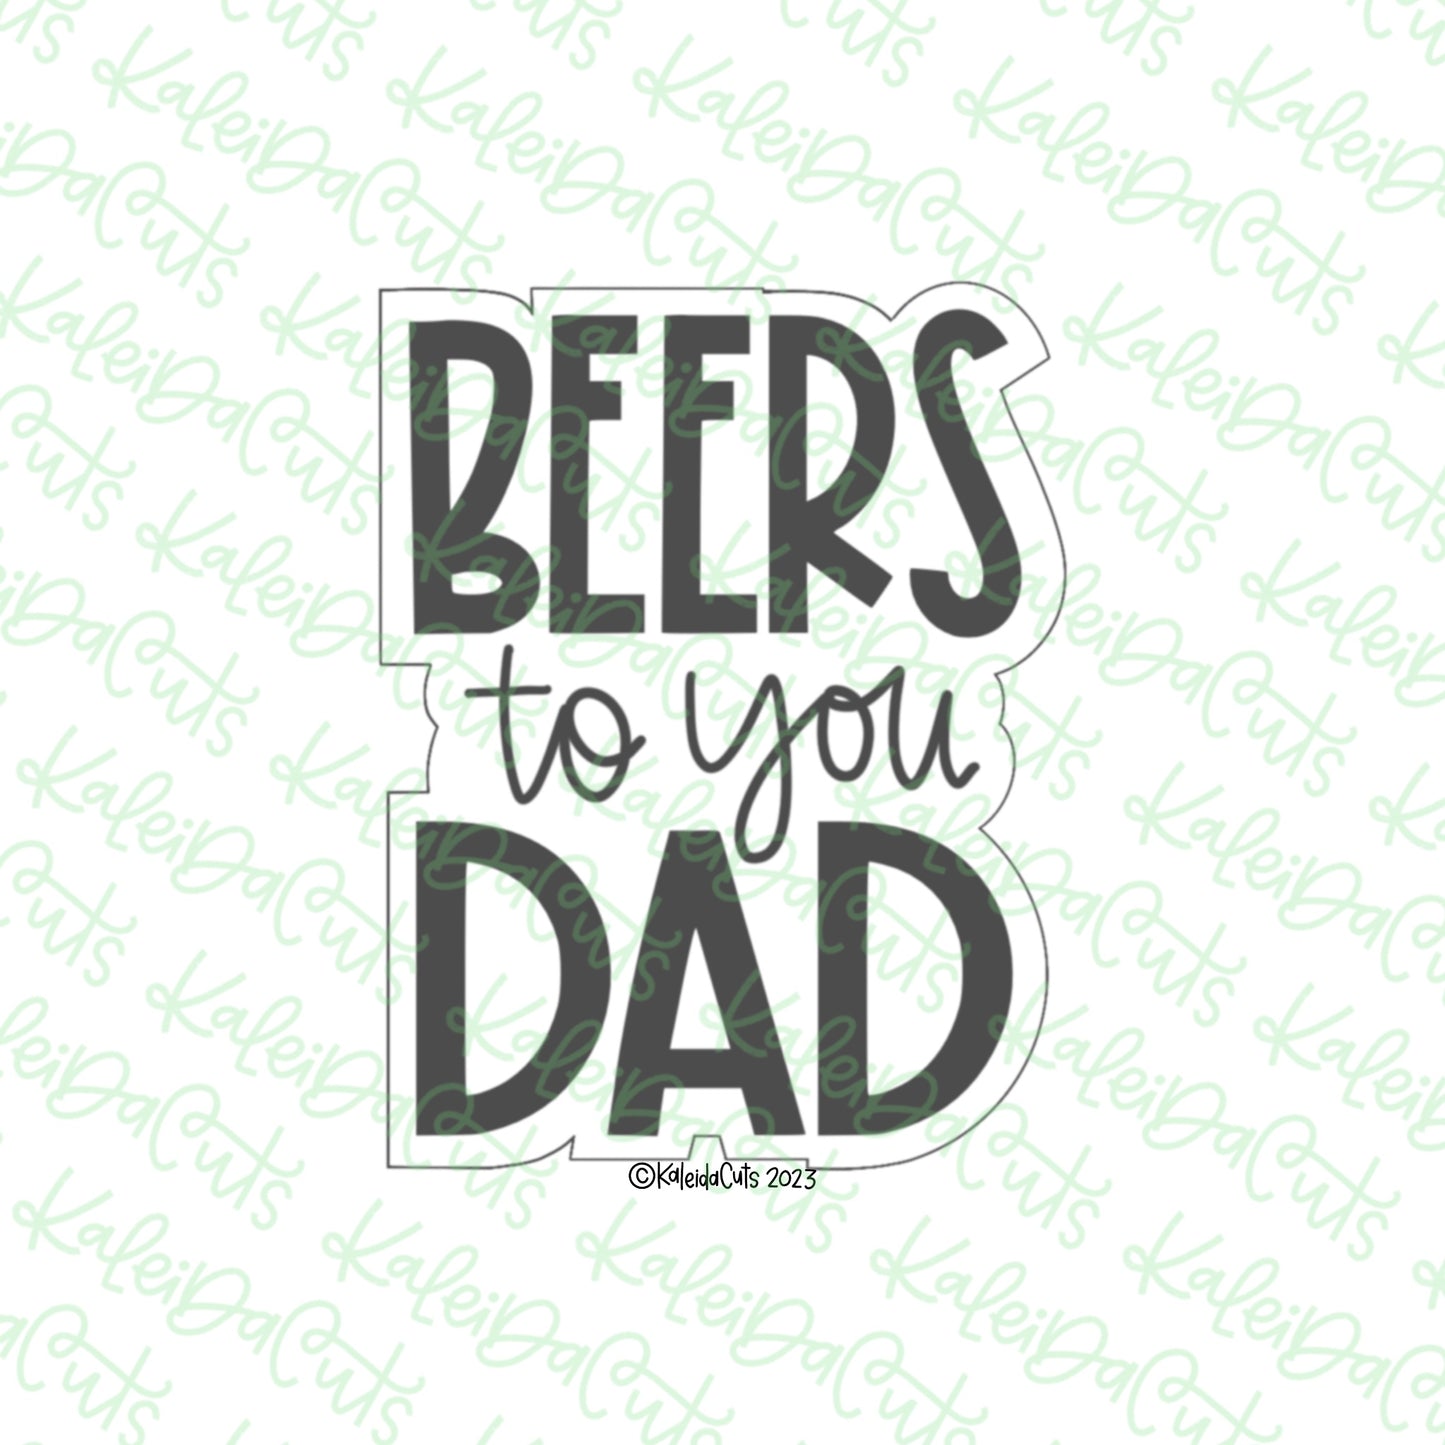 Beers to Dad Cookie Cutter